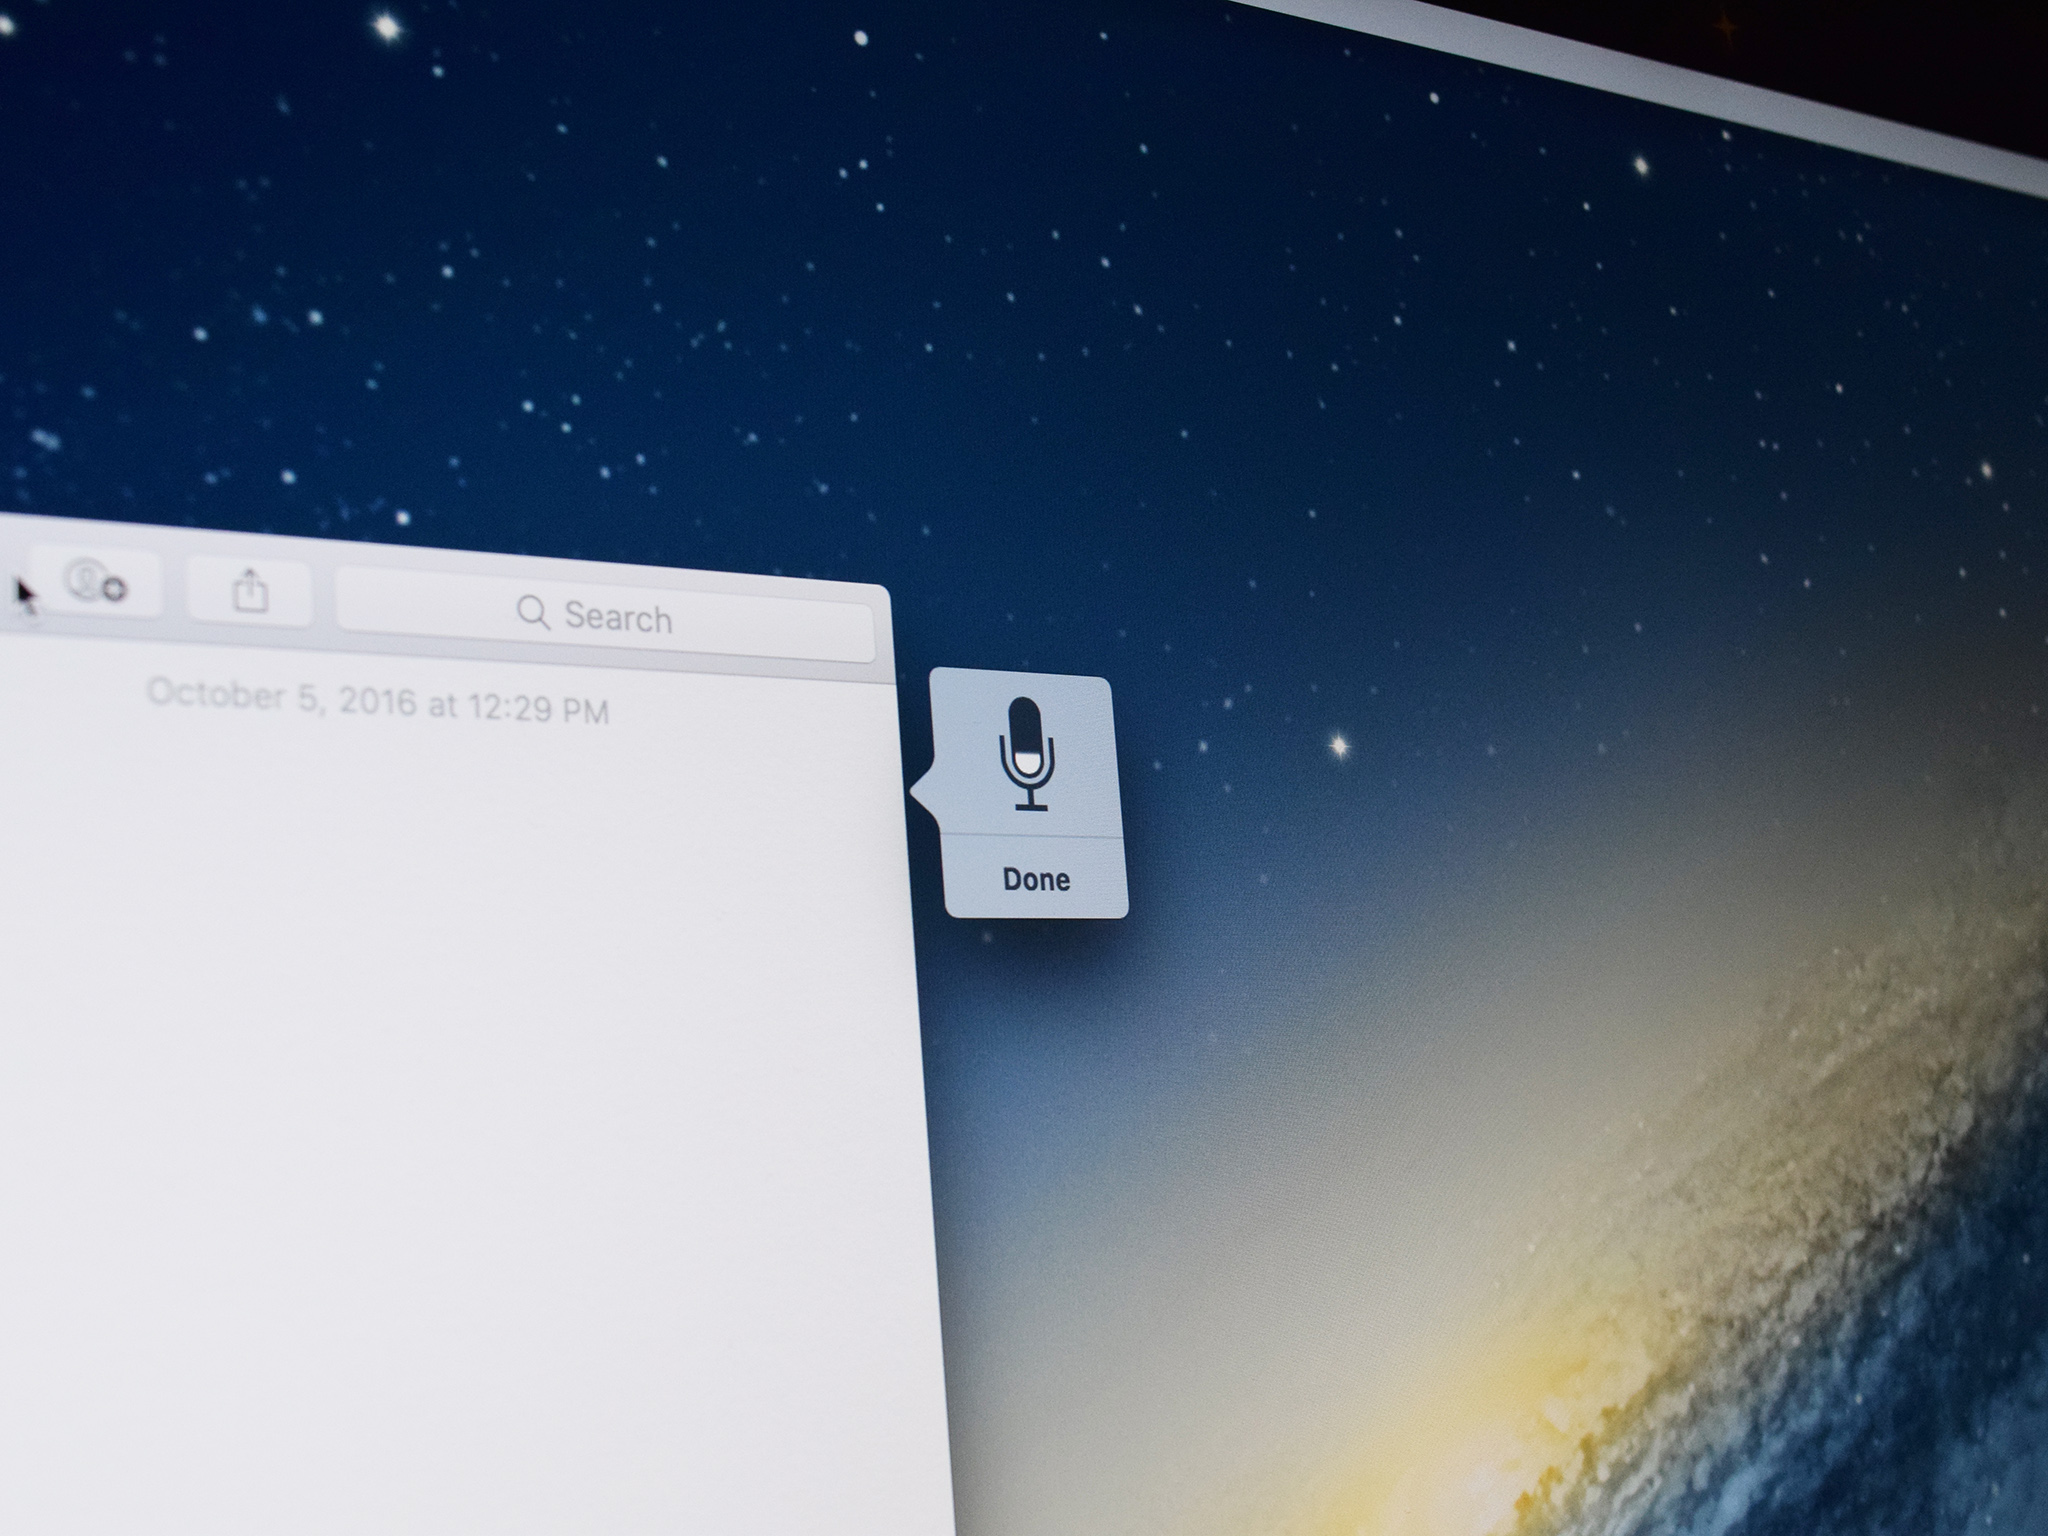 How to use Dictation on Mac